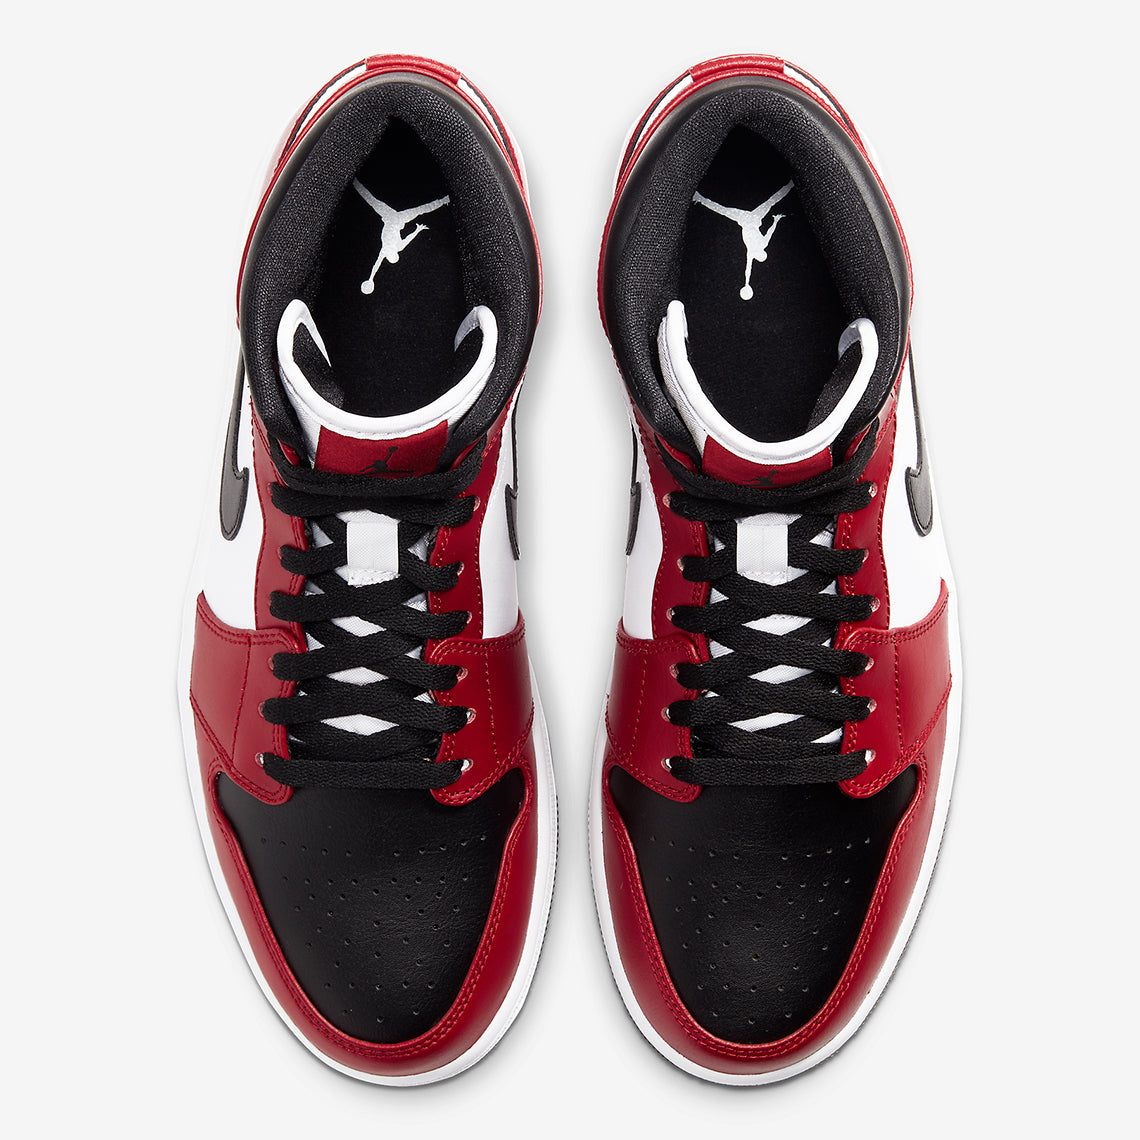 Air Jordan 1 Mid Chicago "Black Toe" - Shop Streetwear, Sneakers, Slippers and Gifts online | Malaysia - The Factory KL